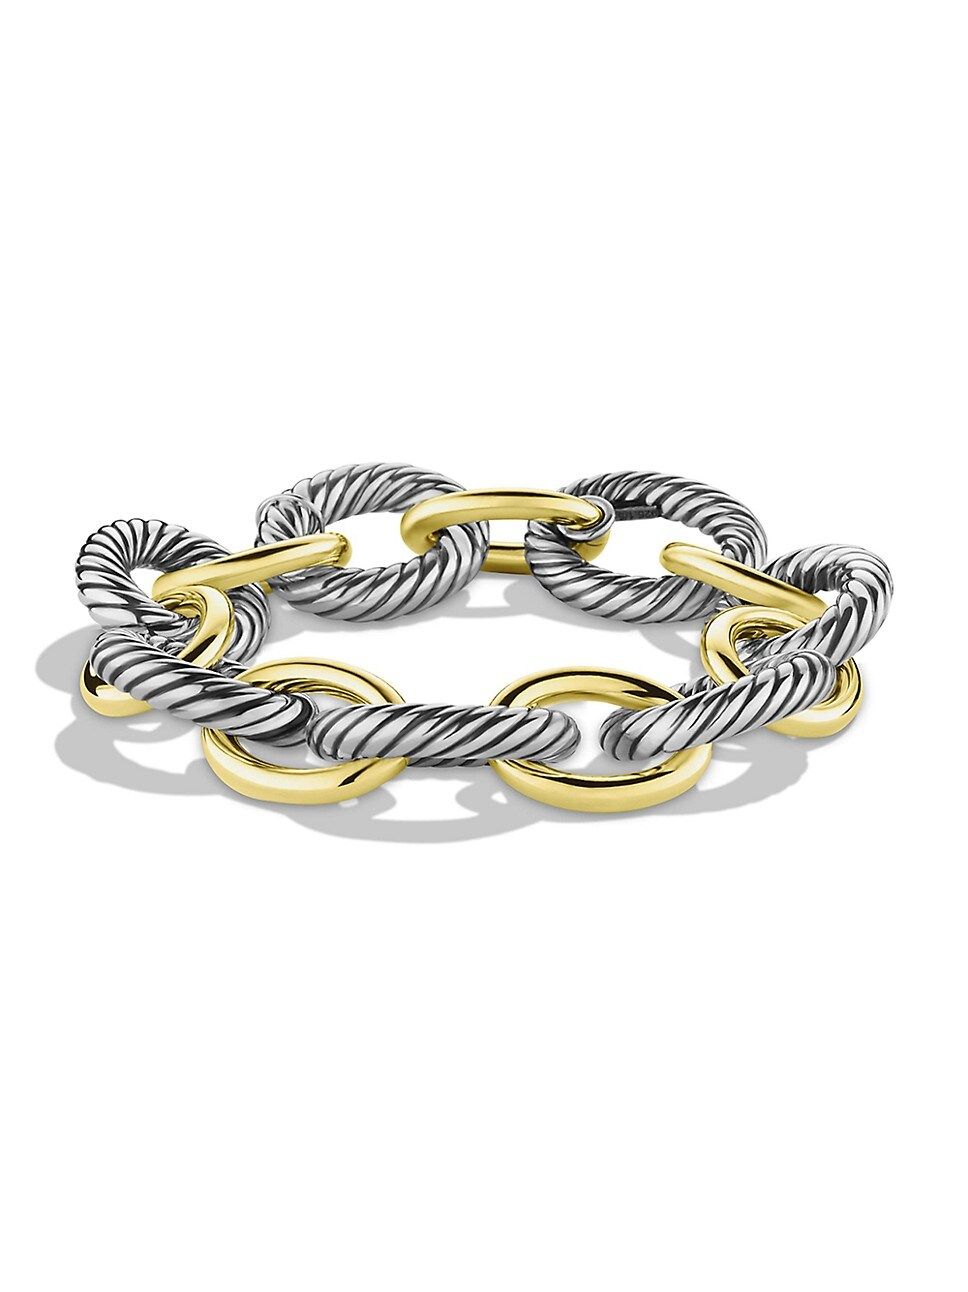 Oval Extra-Large Link Bracelet with Gold | Saks Fifth Avenue